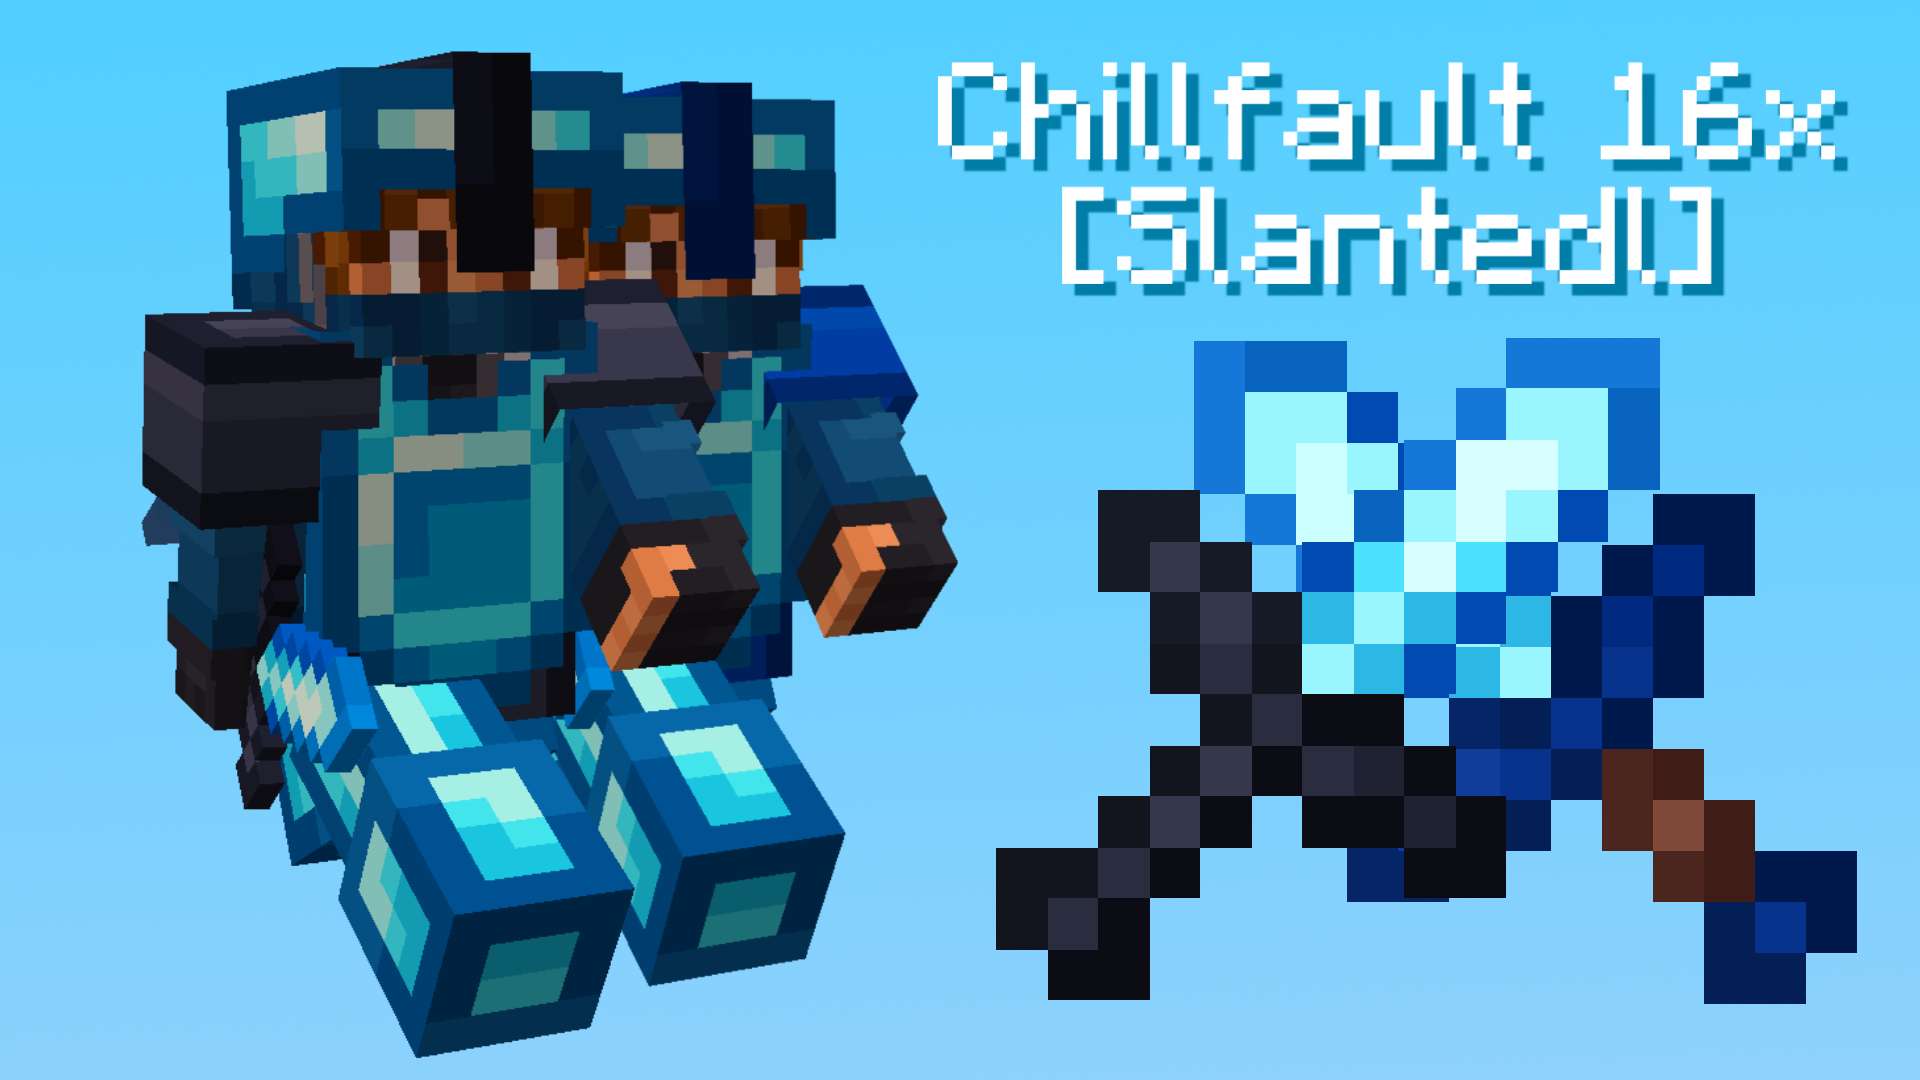 Chillfault 16x [Slanted] 16x by Jes13 on PvPRP